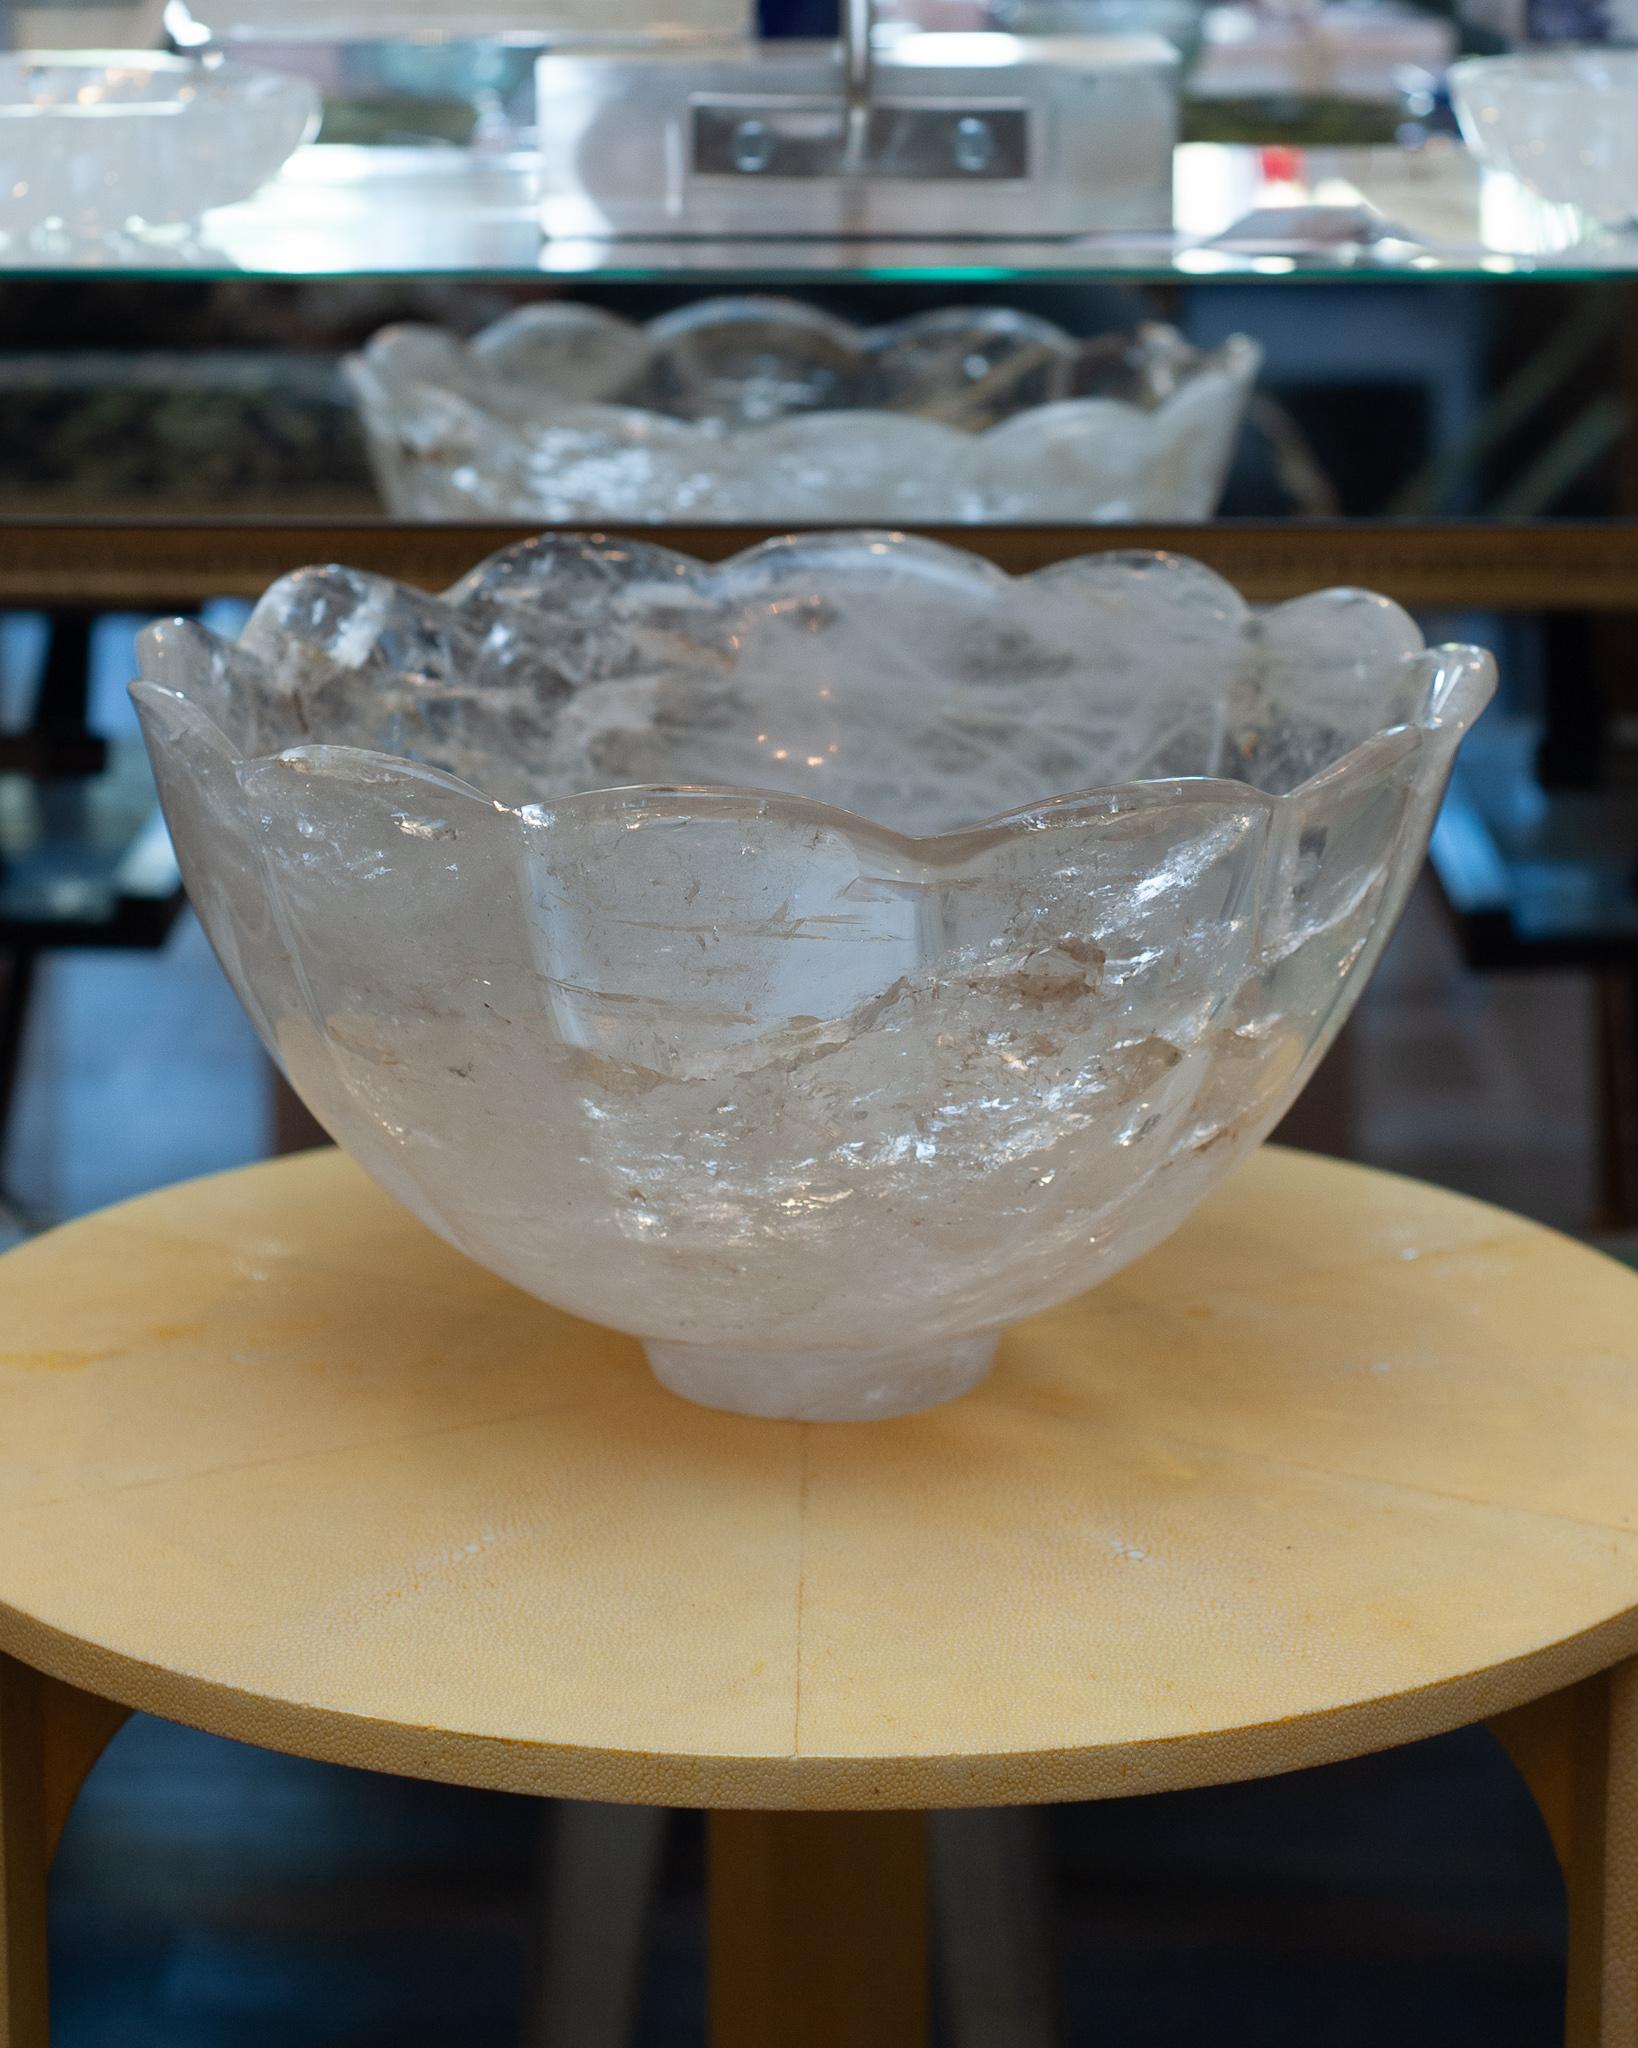 Bring the healing energy of rock crystal into your home with this large scale beautiful carved bowl. This carved Rock Crystal bowl with scalloped edges was sourced in Paris. The quality of the carving as well as its size, indicate its rarity. It is